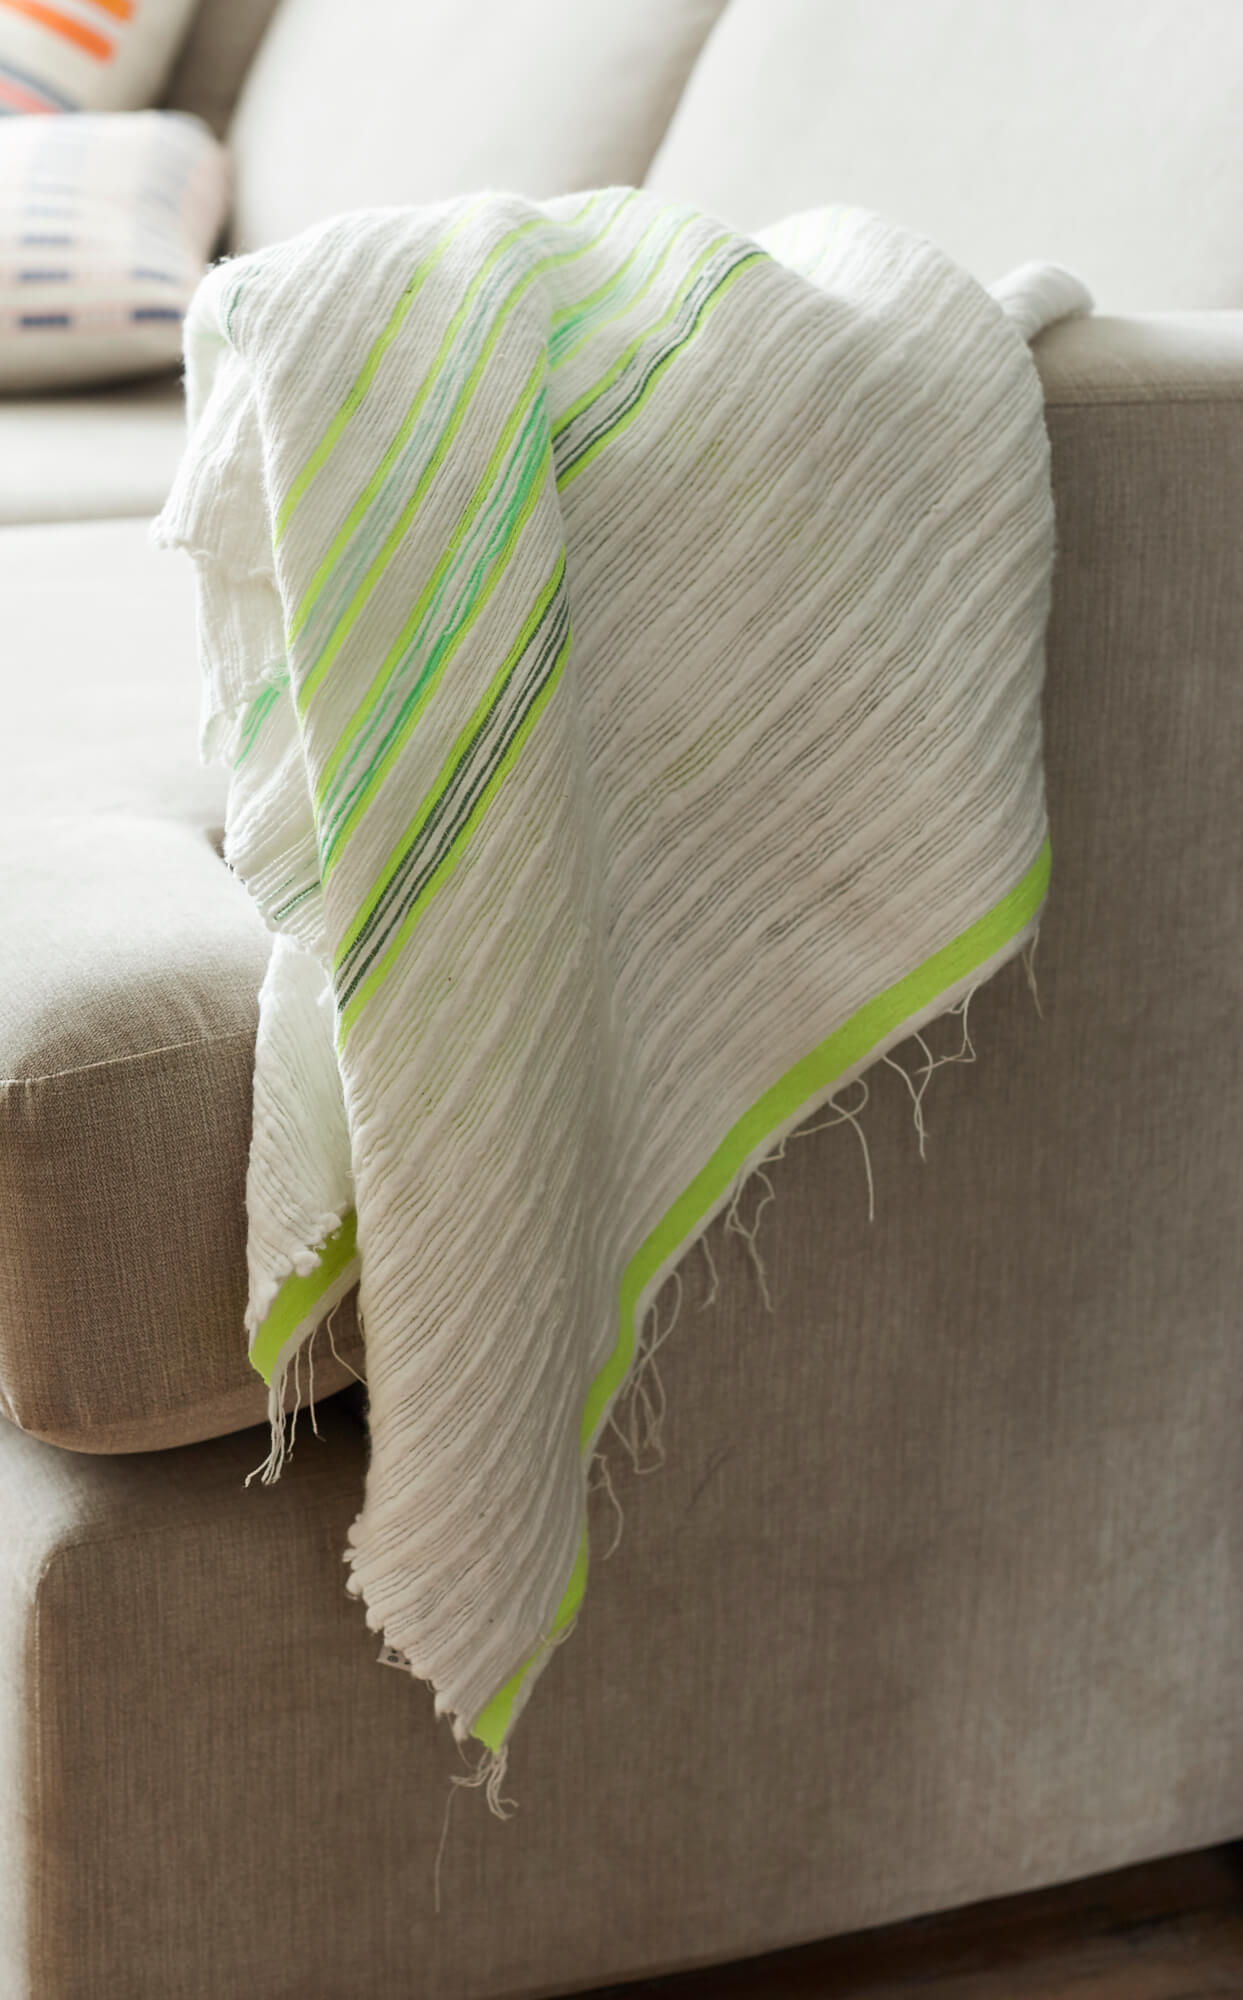 Handmade white and green cotton blanket on a sofa